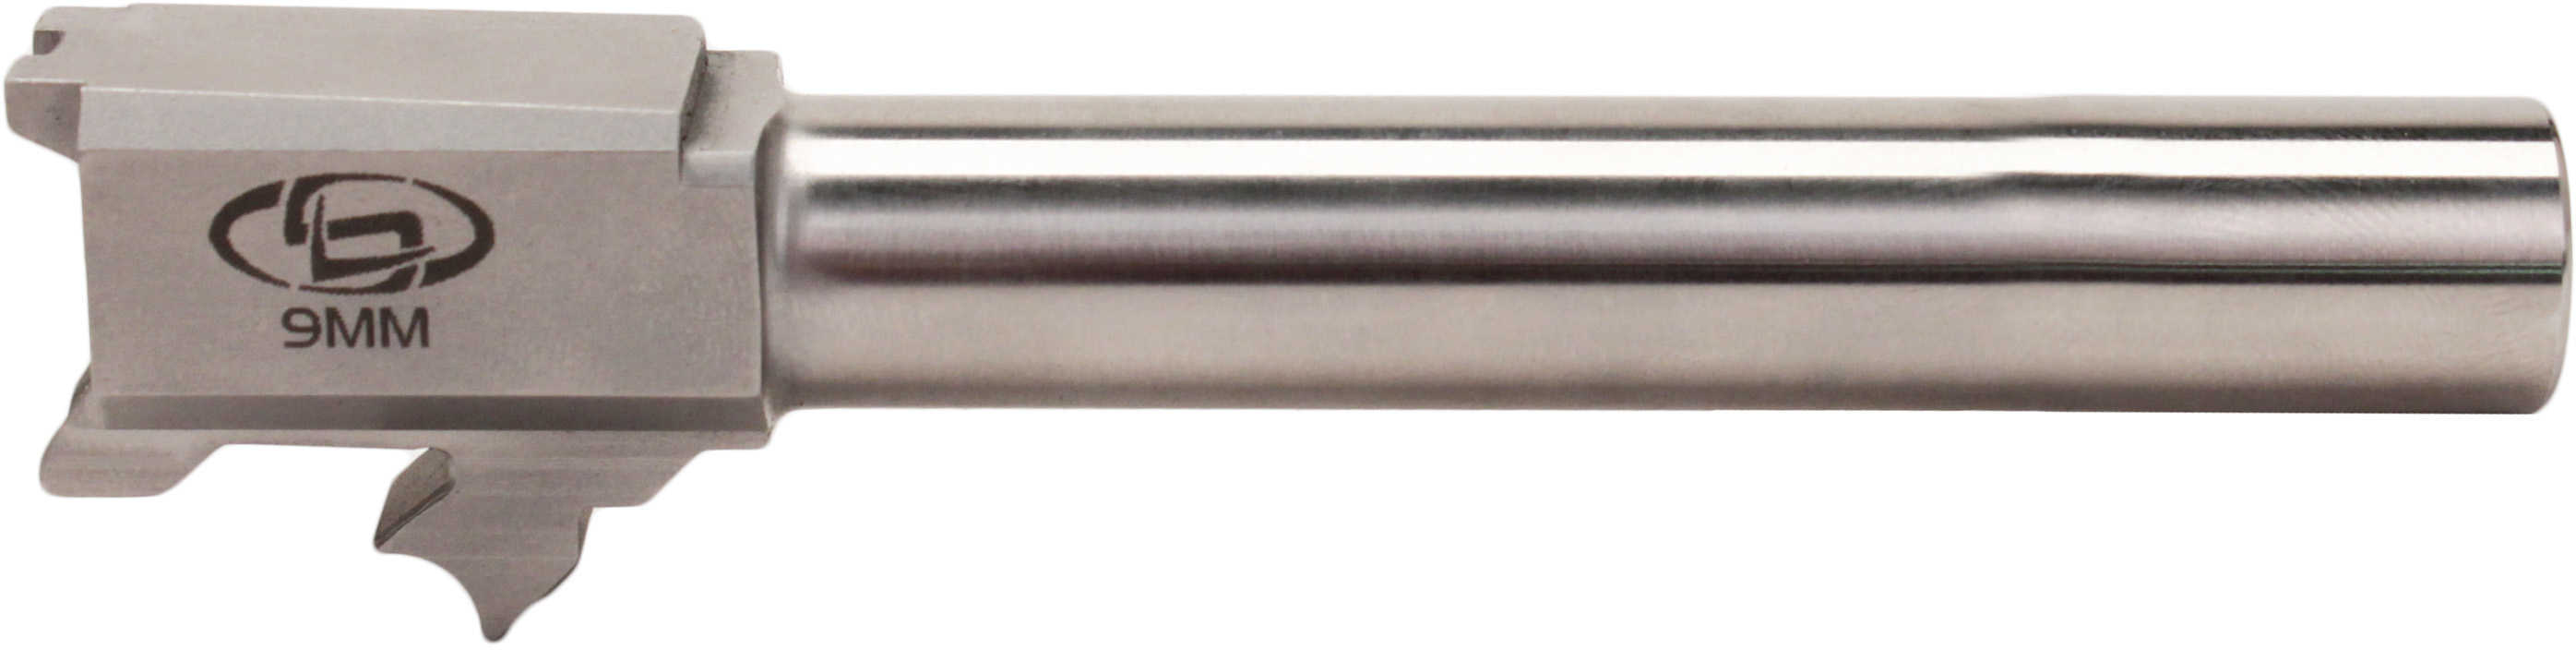 Storm Lake Barrels 9MM 4.6" Fits Springfield XDM Stainless Finish Conversion Converts 40 S&W